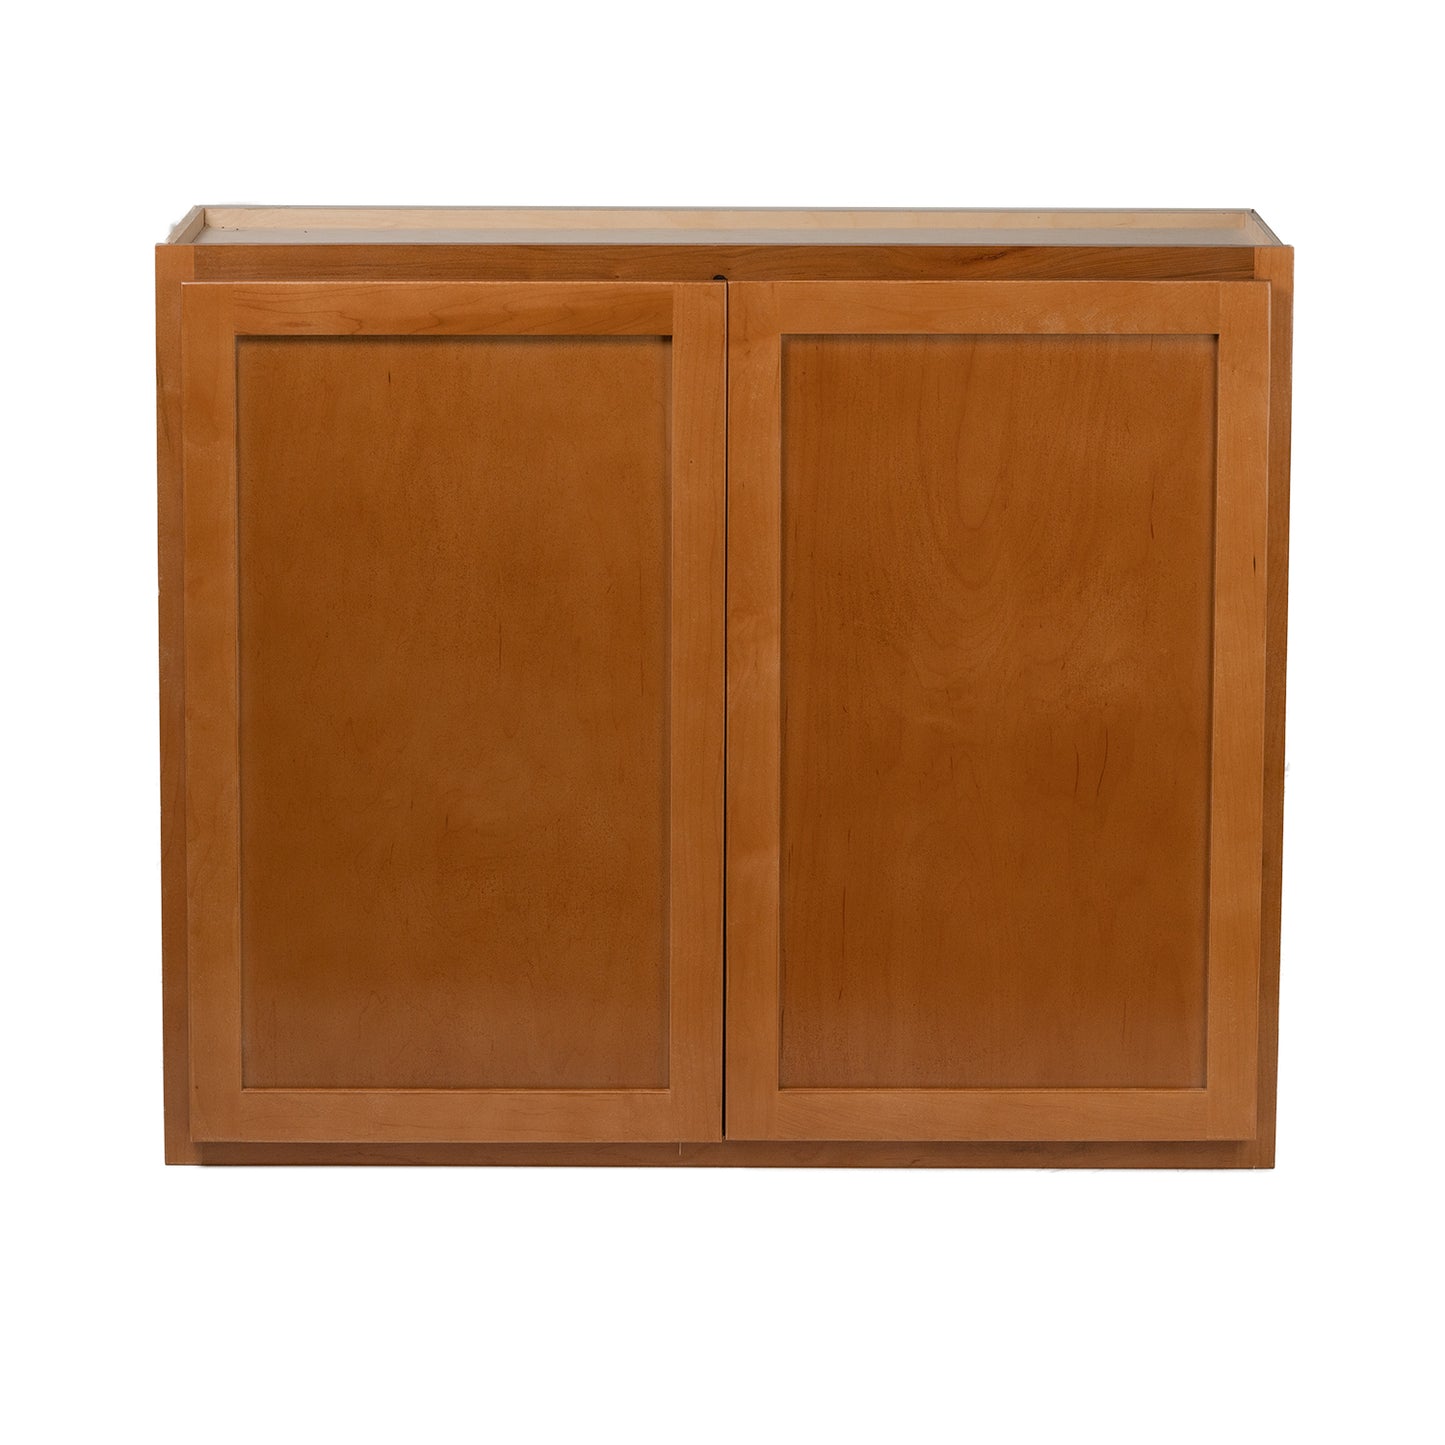 Quicklock RTA (Ready-to-Assemble) Provincial Stain 30"Wx30"Hx12"D Wall Cabinet